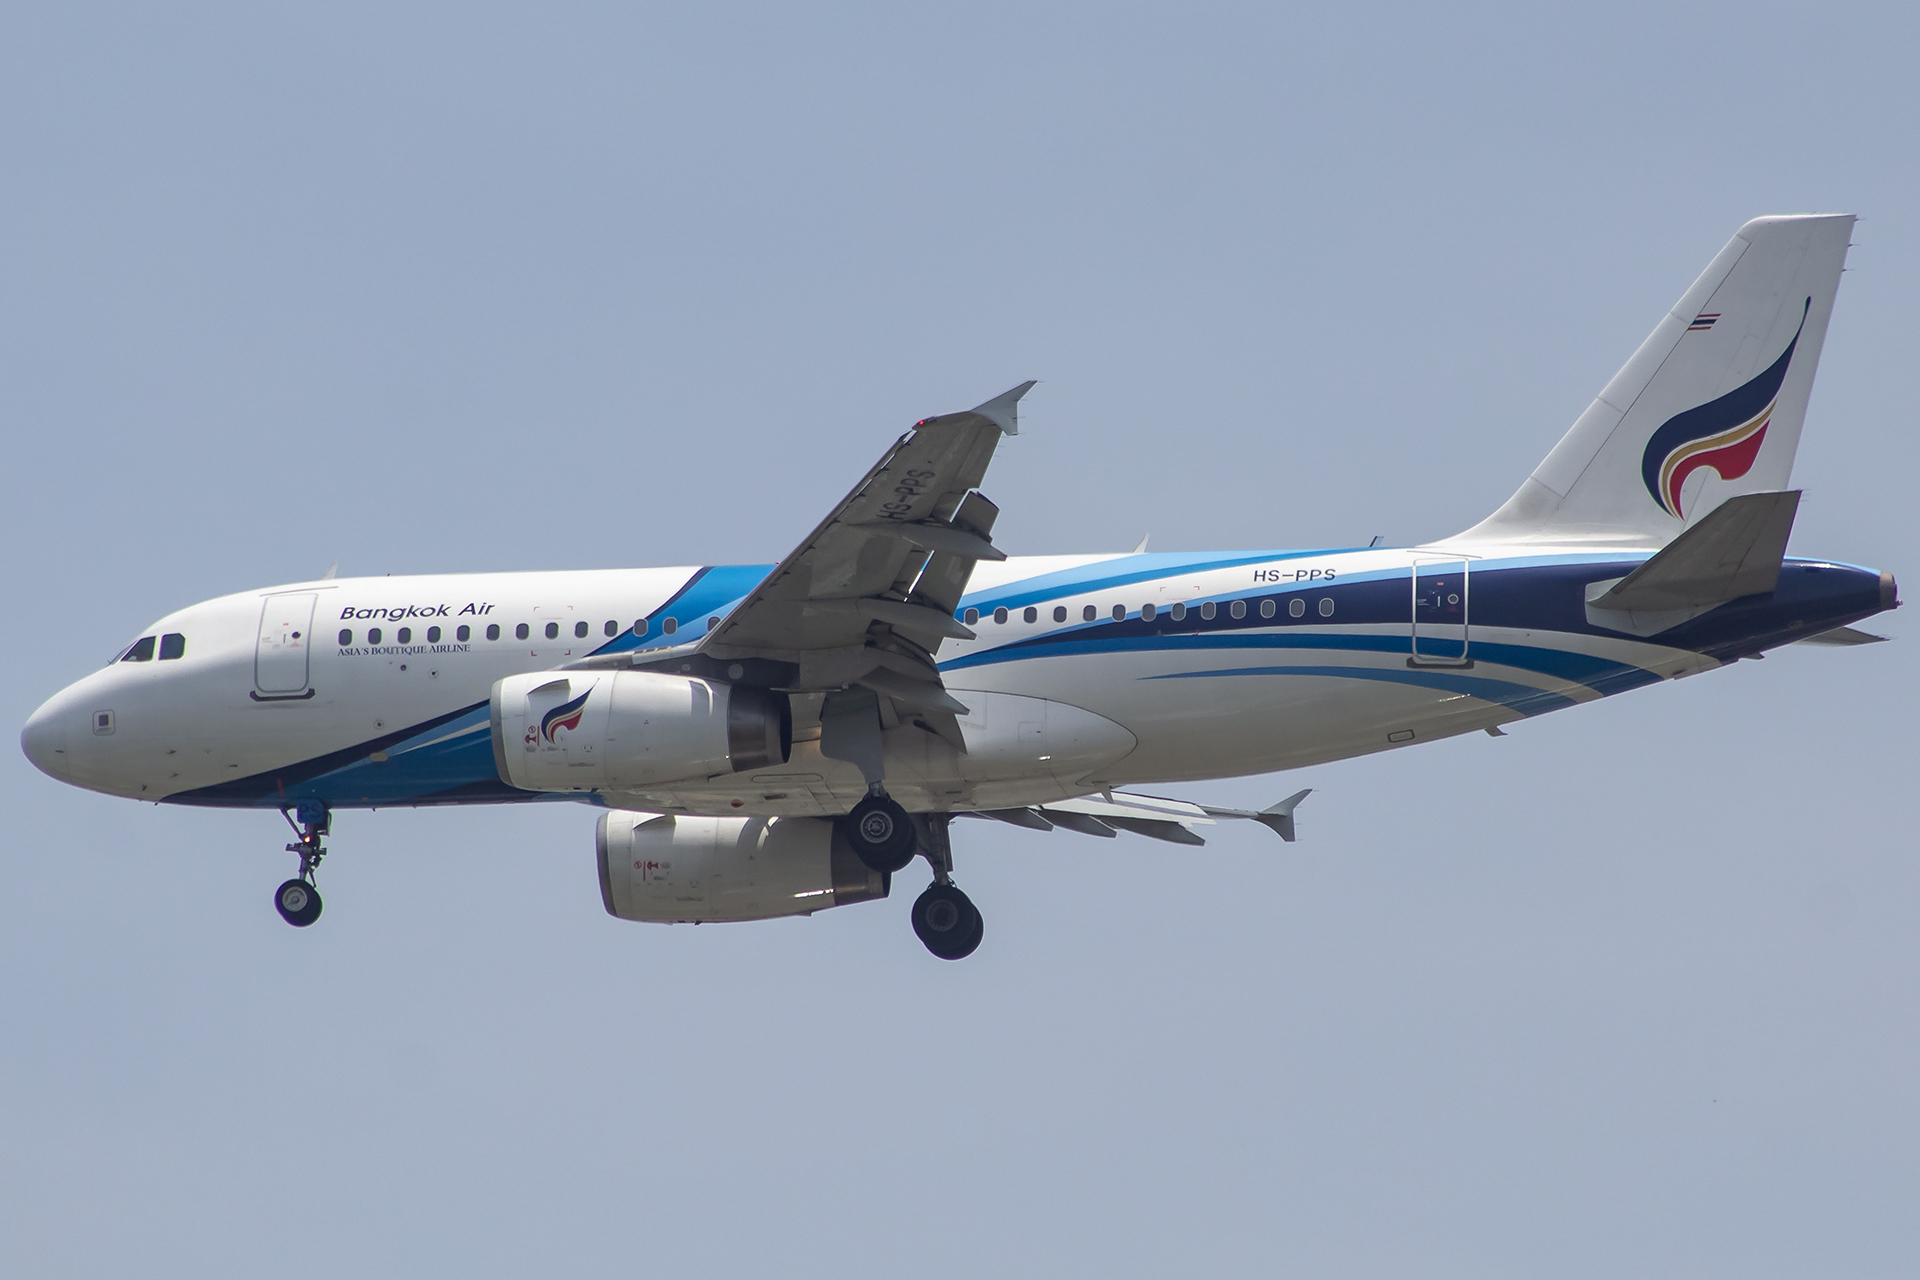 HS-PPS/HSPPS Bangkok Airways Airbus A319 Airframe Information - AVSpotters.com